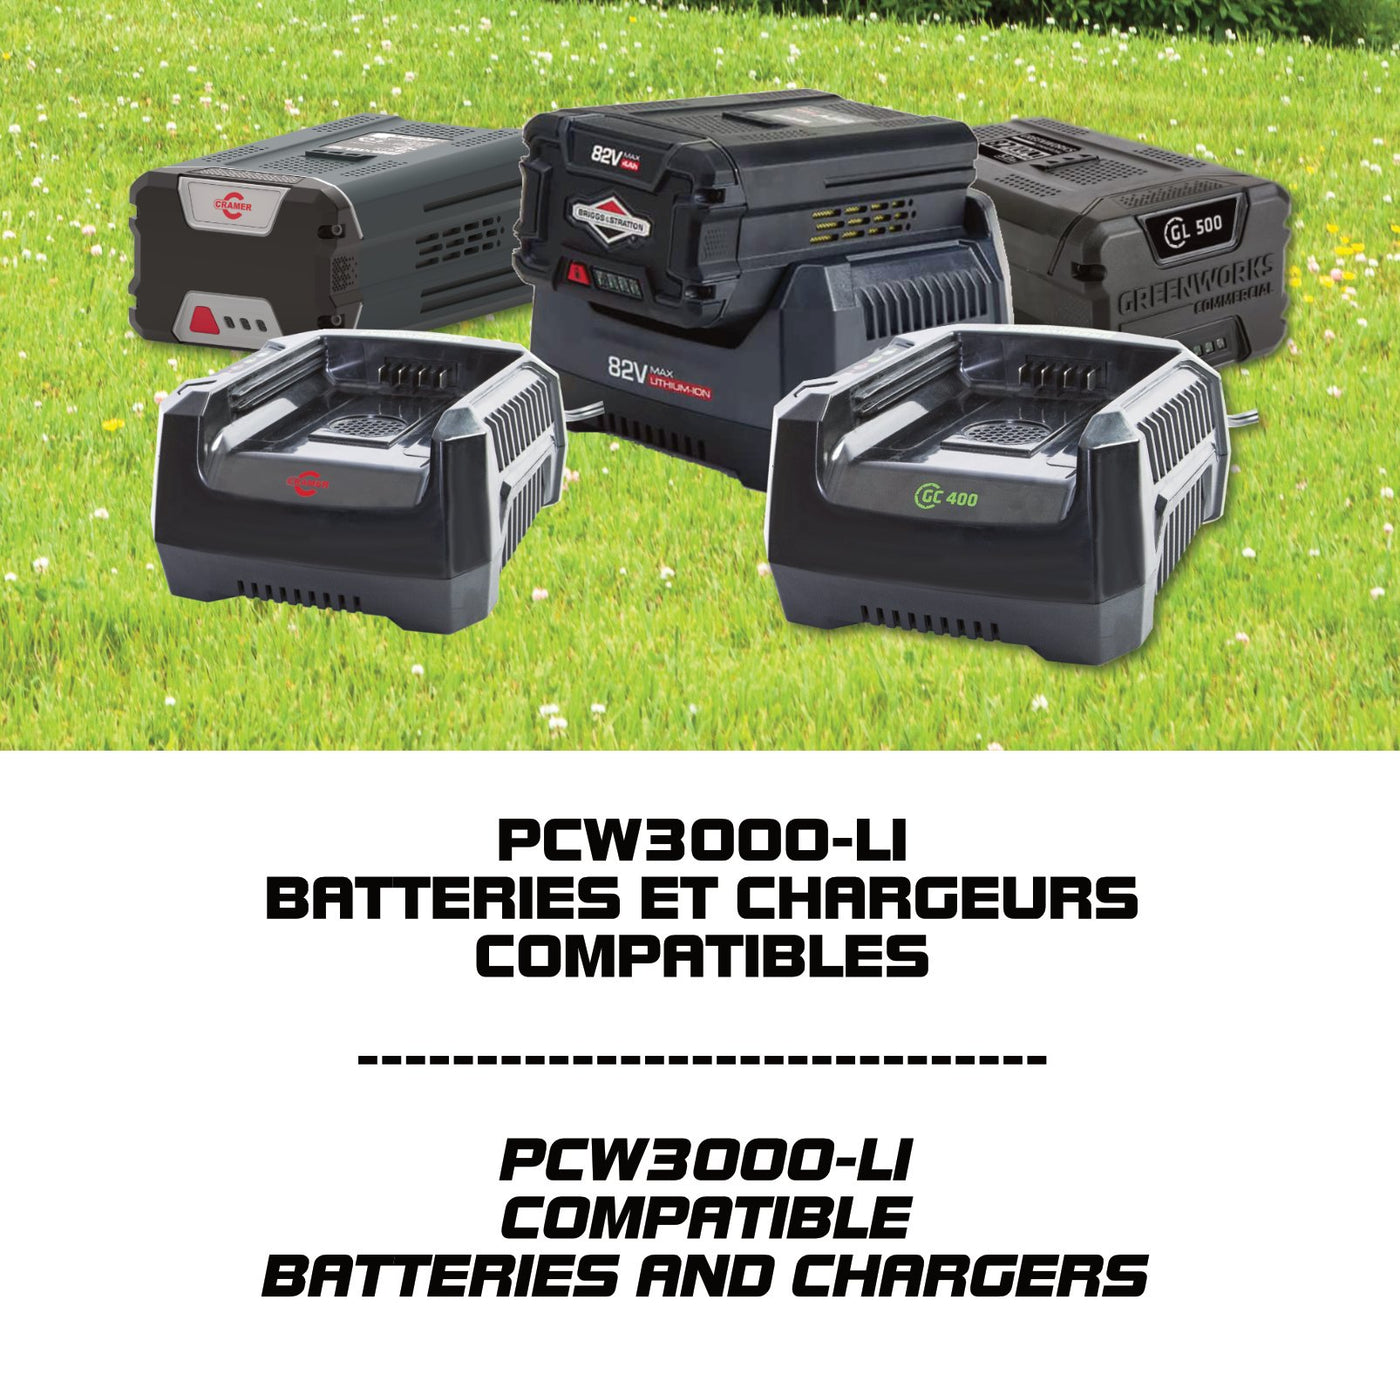 PCW3000-Li COMPATIBLE BATTERIES AND CHARGERS